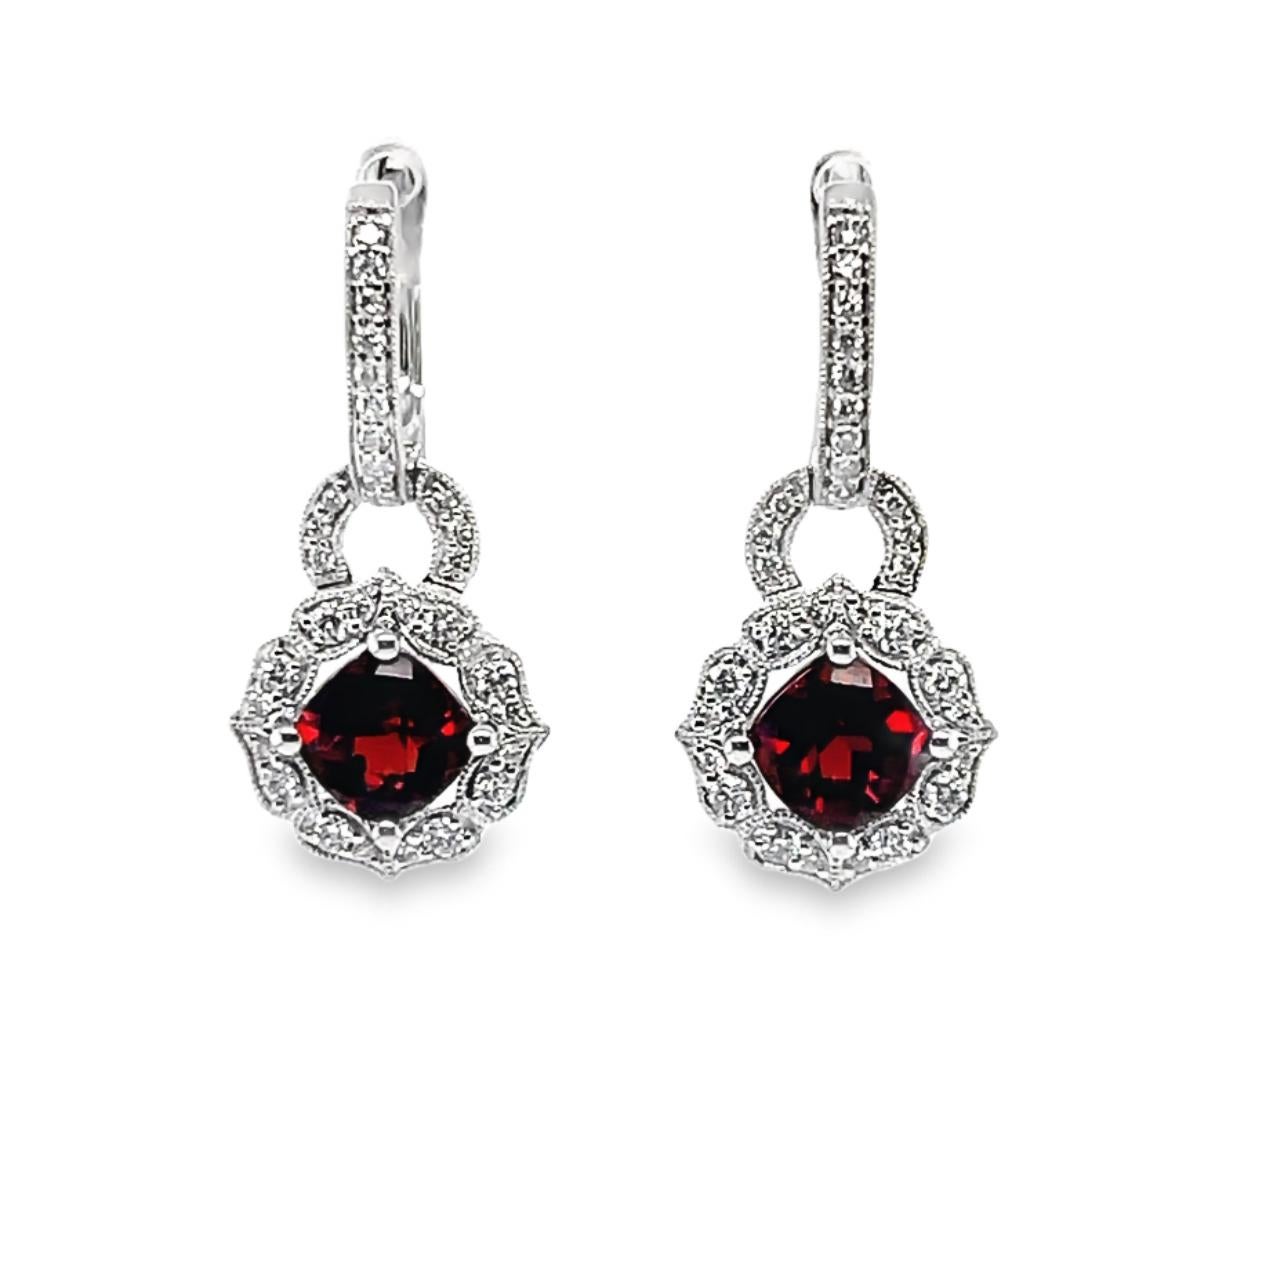 These stunning hoop earrings have top quality cushion checkerboard Garnet center surrounded by sparkling brilliant cut diamonds. These earrings come in a beautiful black box for the perfect gift. They have detailed tags and are brand new. 

14KW